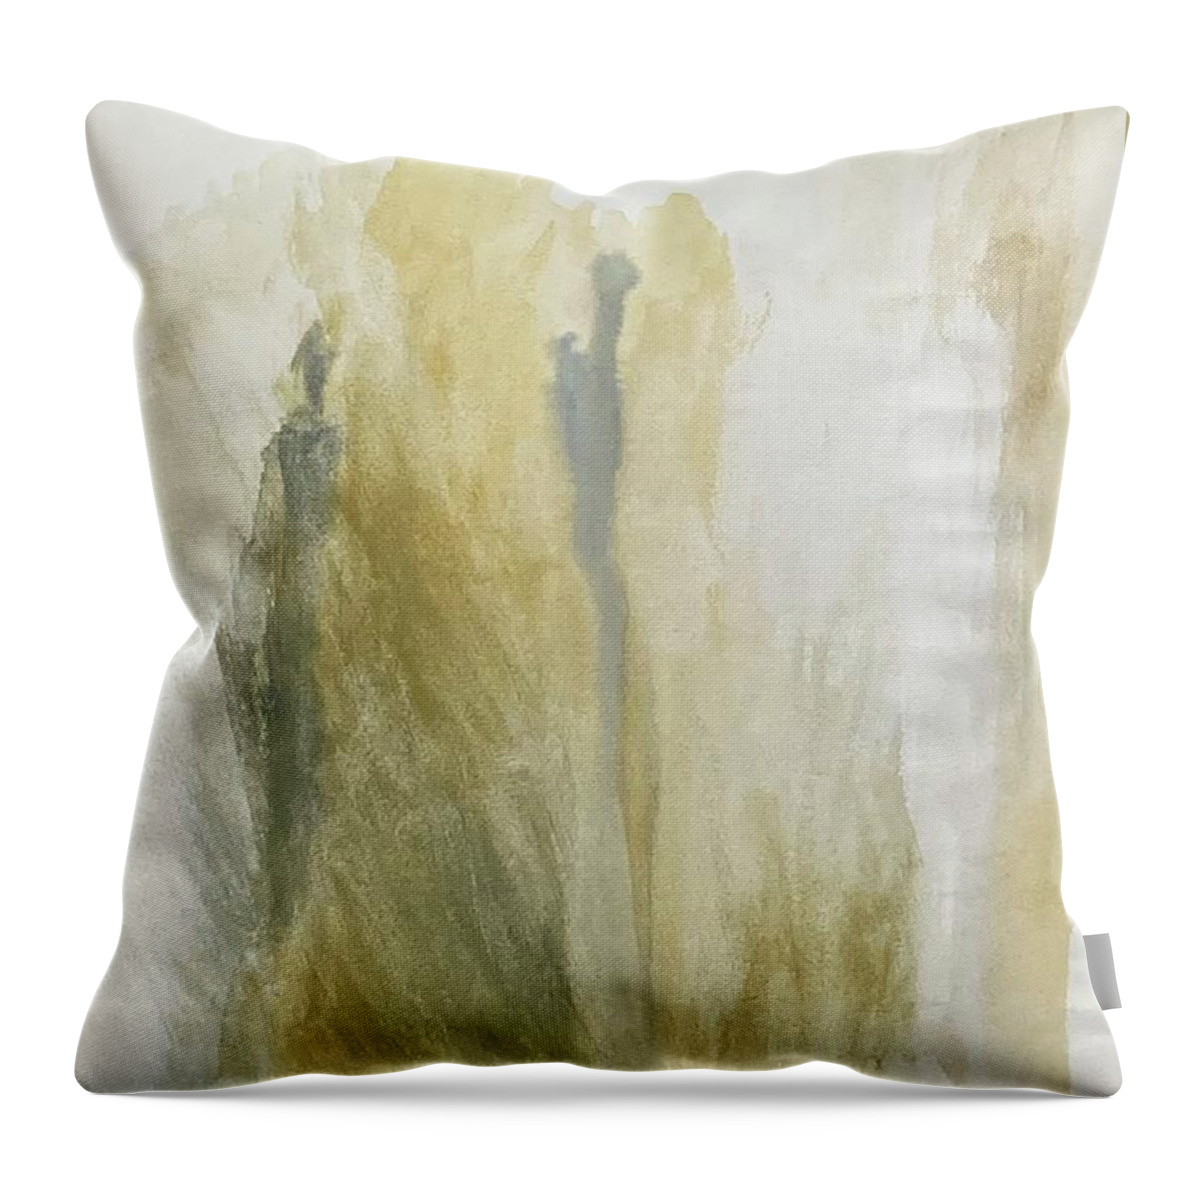 Figures Throw Pillow featuring the painting Silhouettes II by David Euler